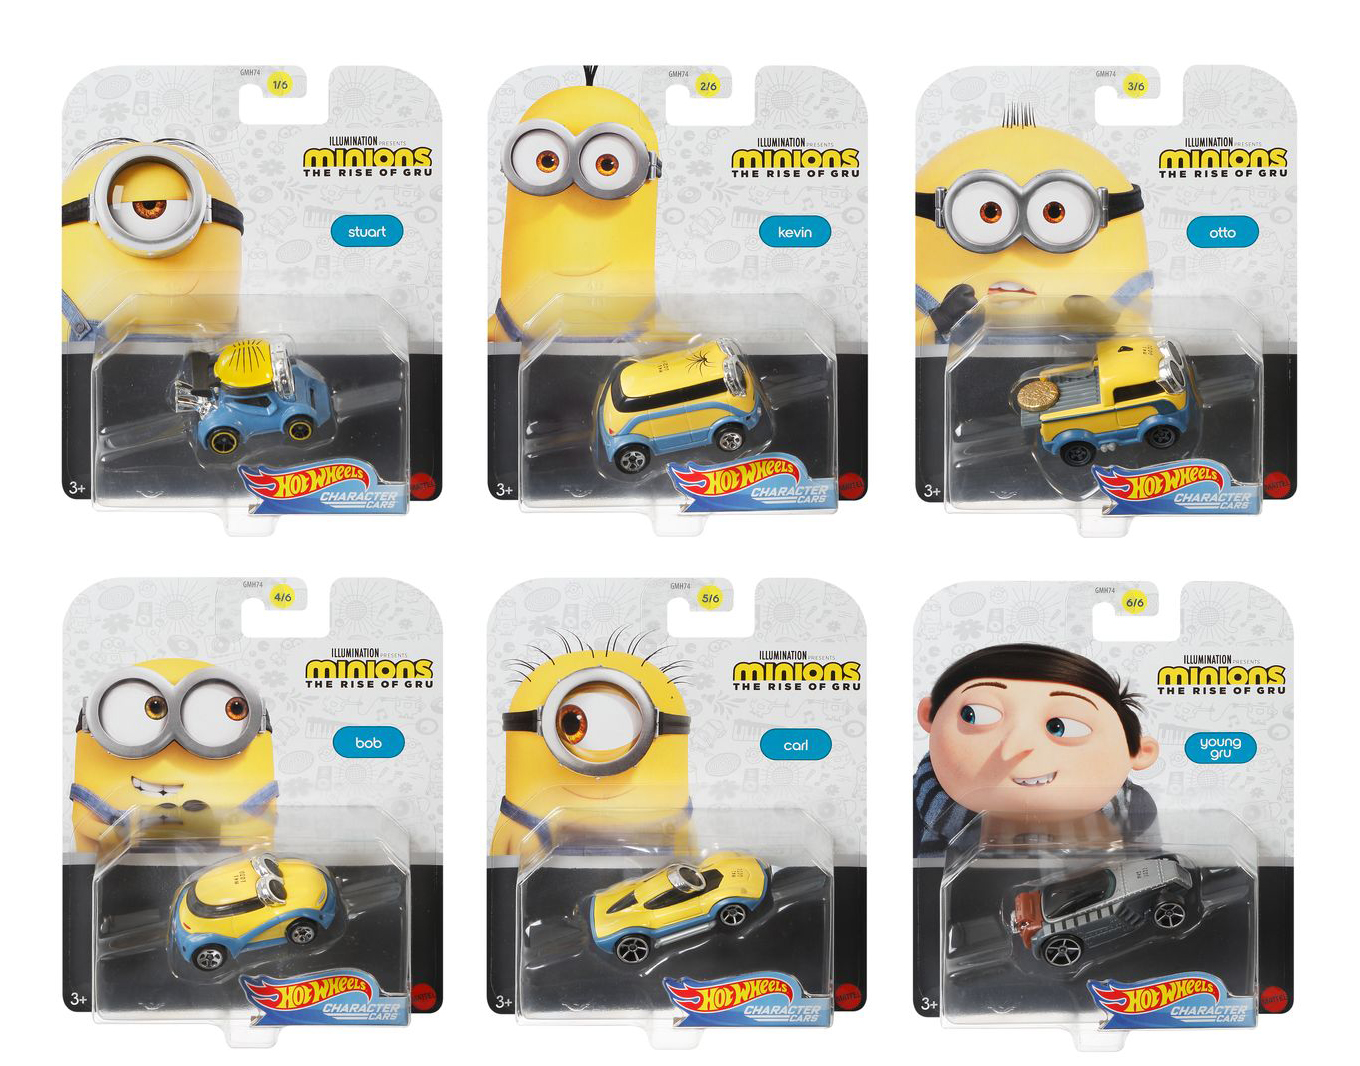 Hot Wheels 2020 Character Car Minions "The Rise of Gru" Set of 6,  1/64 Collectible Die Cast Toy Cars - image 2 of 2